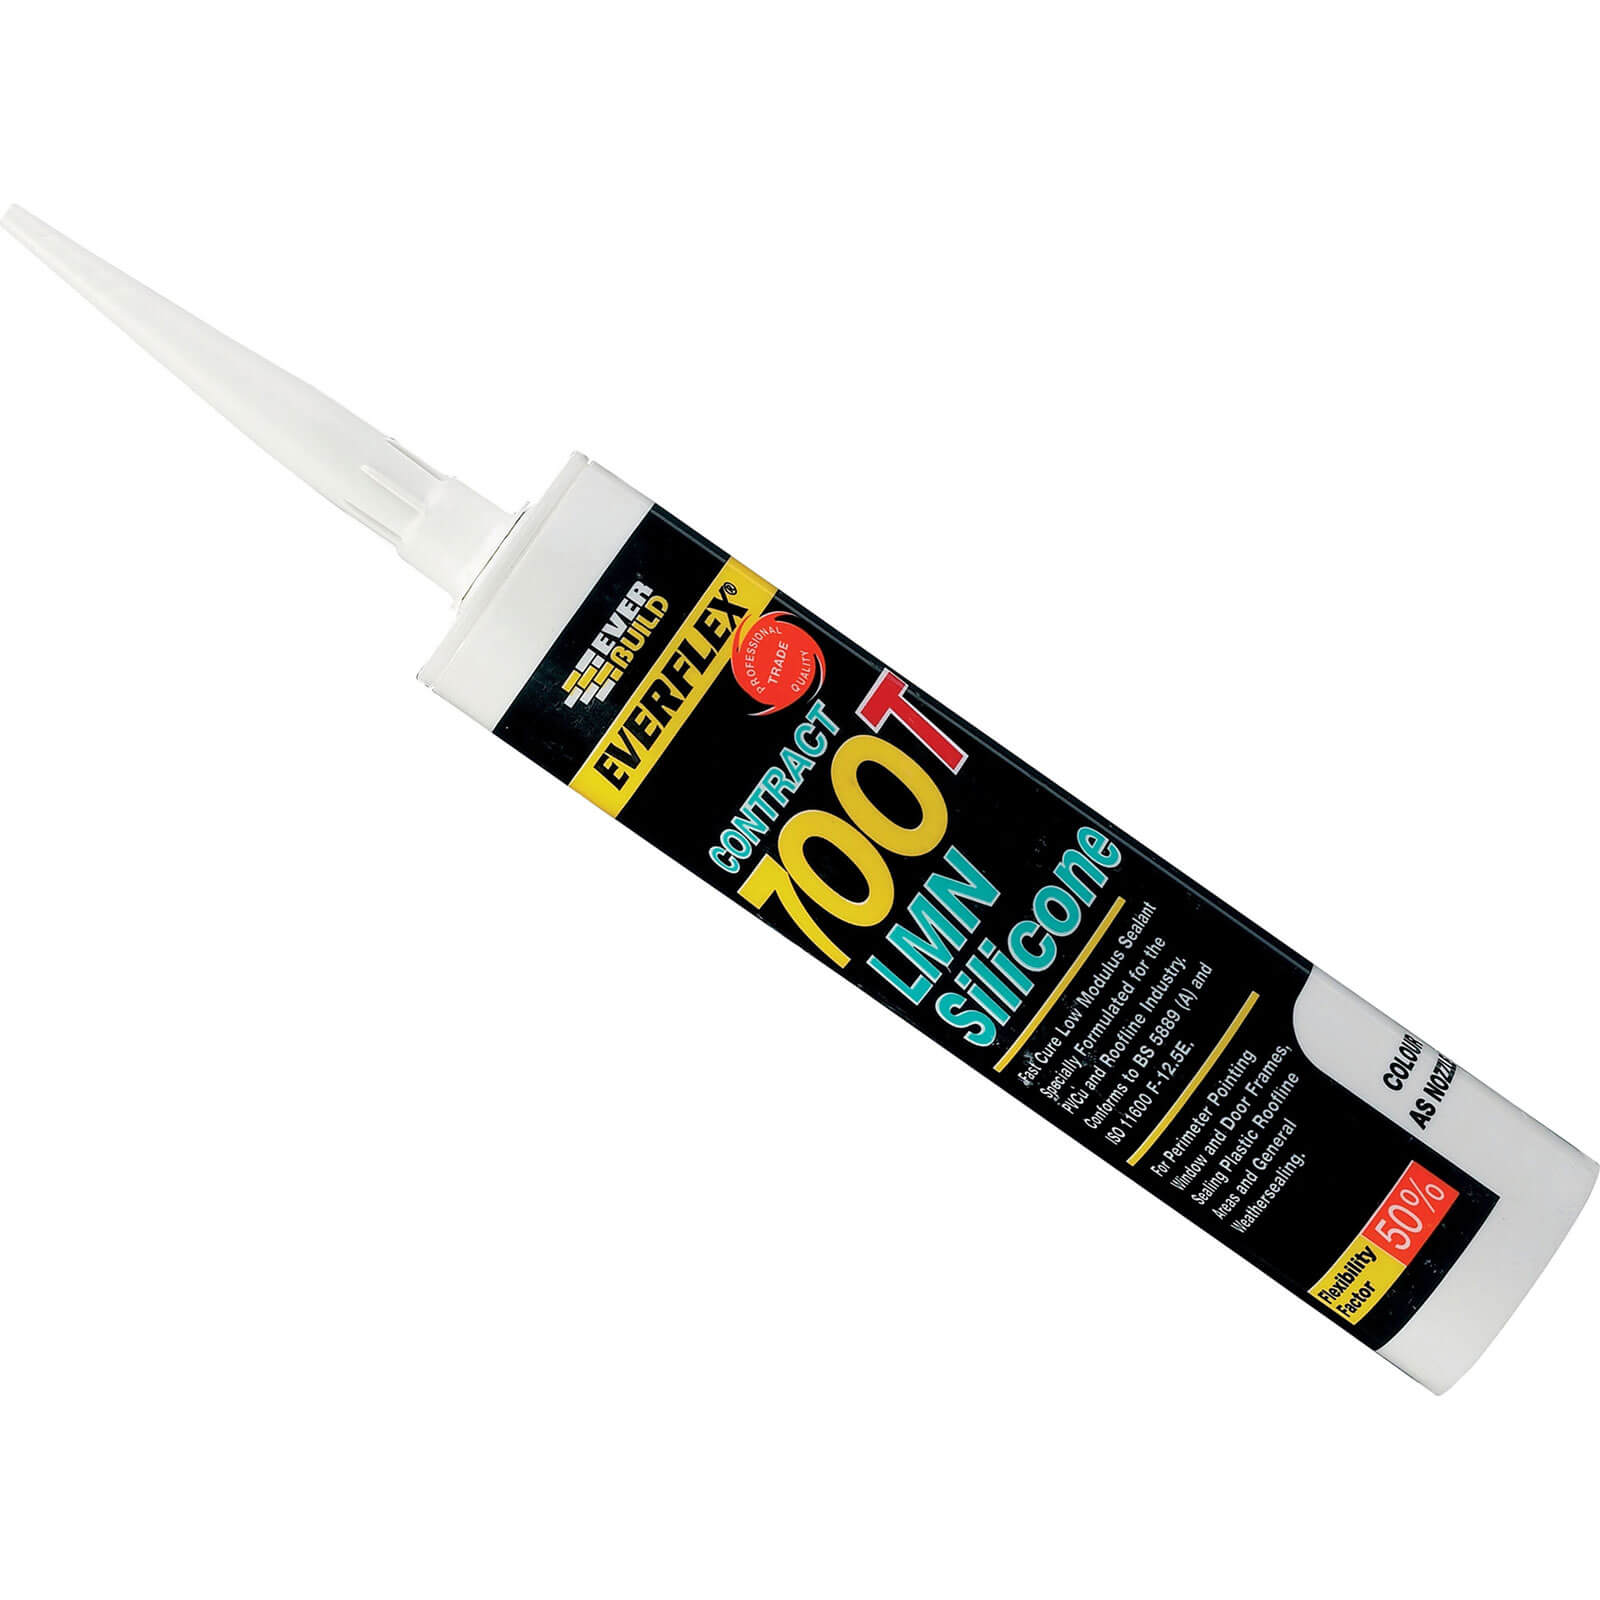 Image of Everbuild Silicone Sealant Brown 310ml